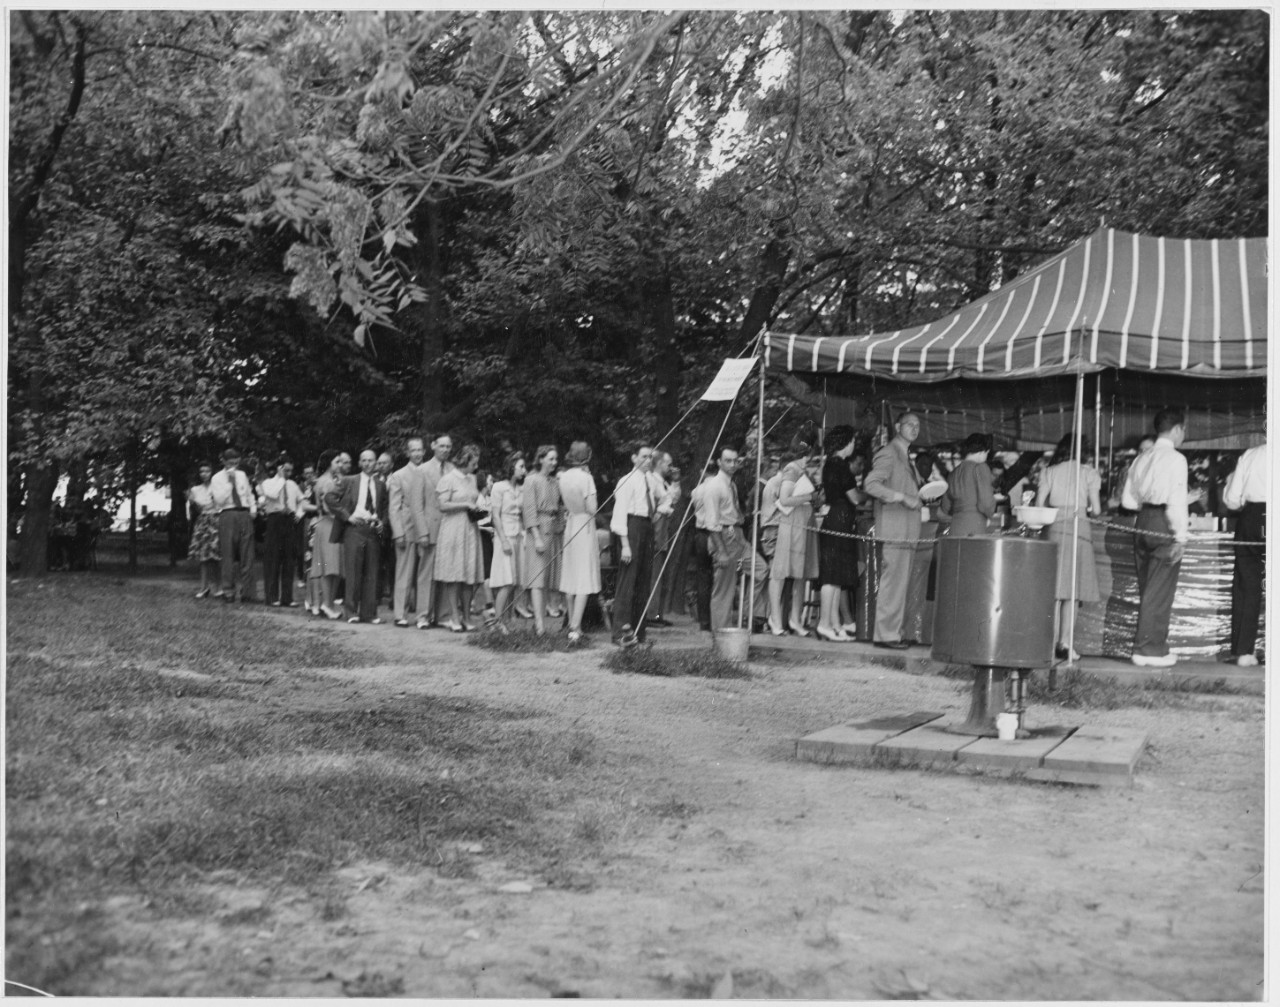 People in line at outdoor cafeteria, Washington, DC